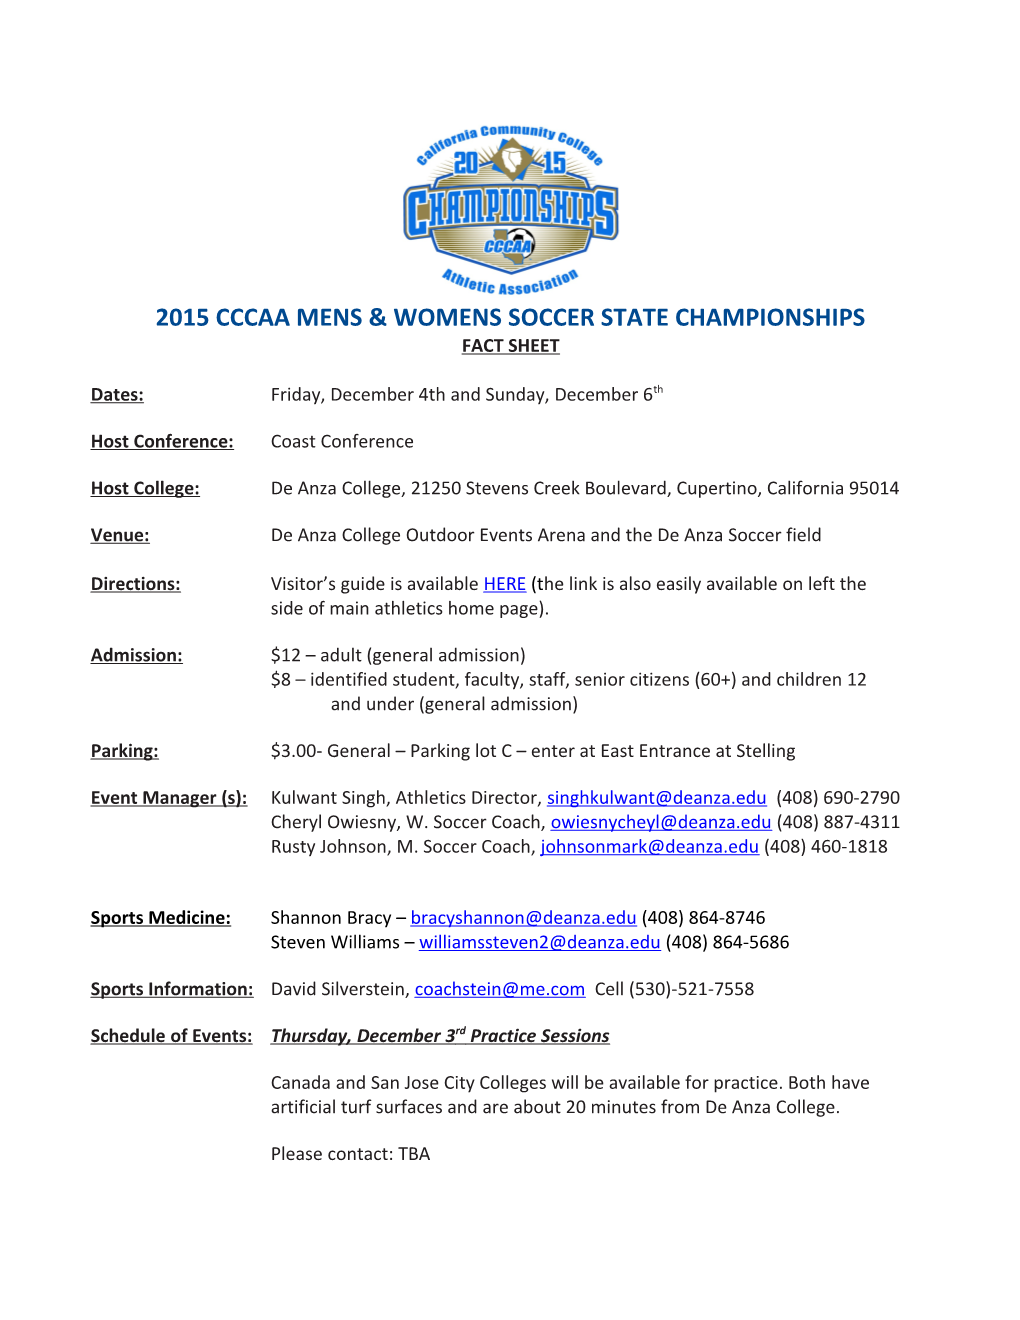 2015Cccaa Mens & Womens Soccer State Championships